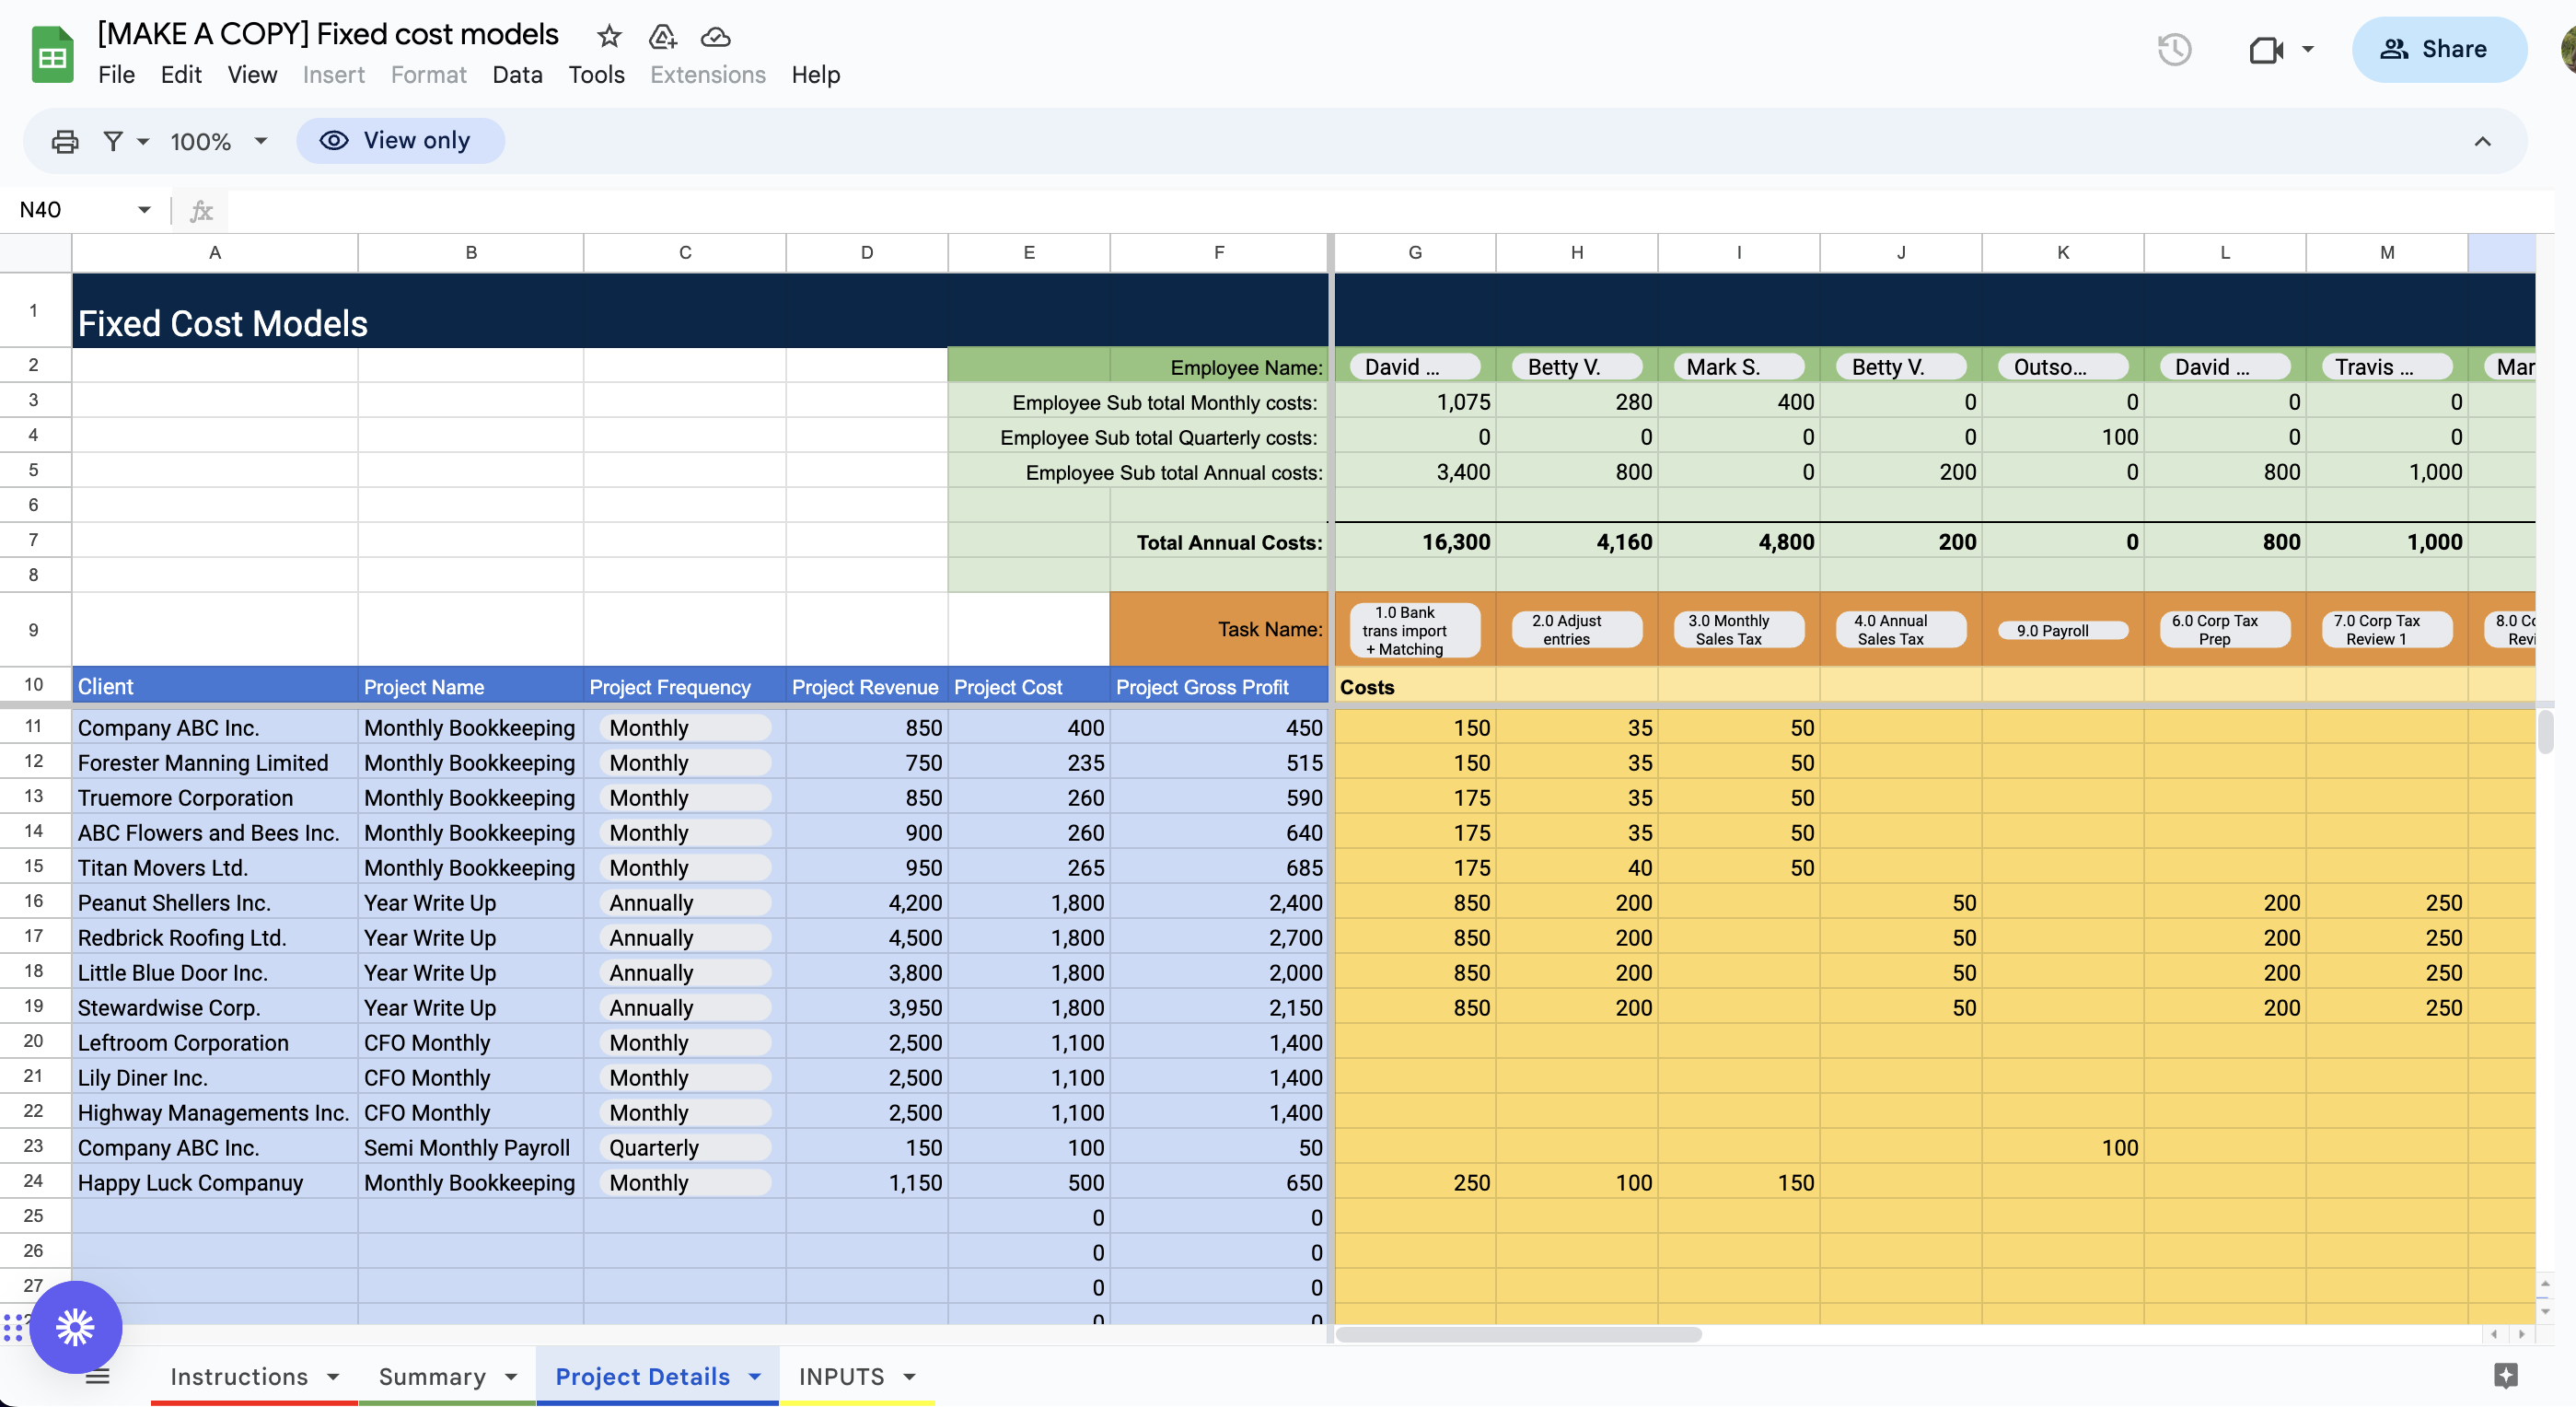 A screenshot of a Fixed Cost Model template created by Mark Stovel from Firm Nexus